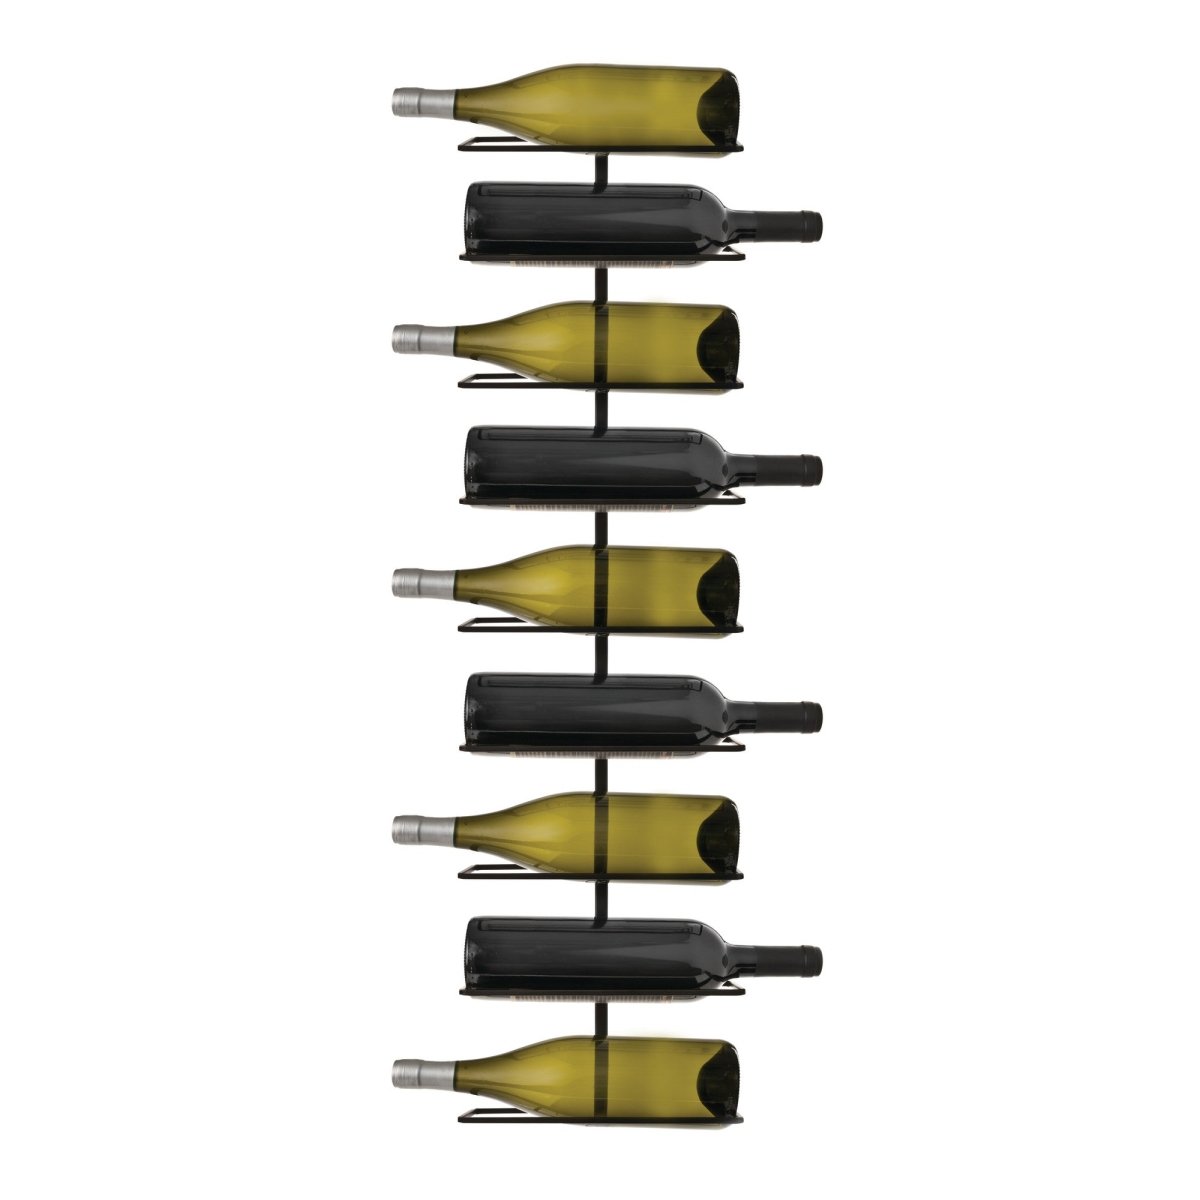 TRUE Align Wall-Mounted Wine Rack - lily & onyx